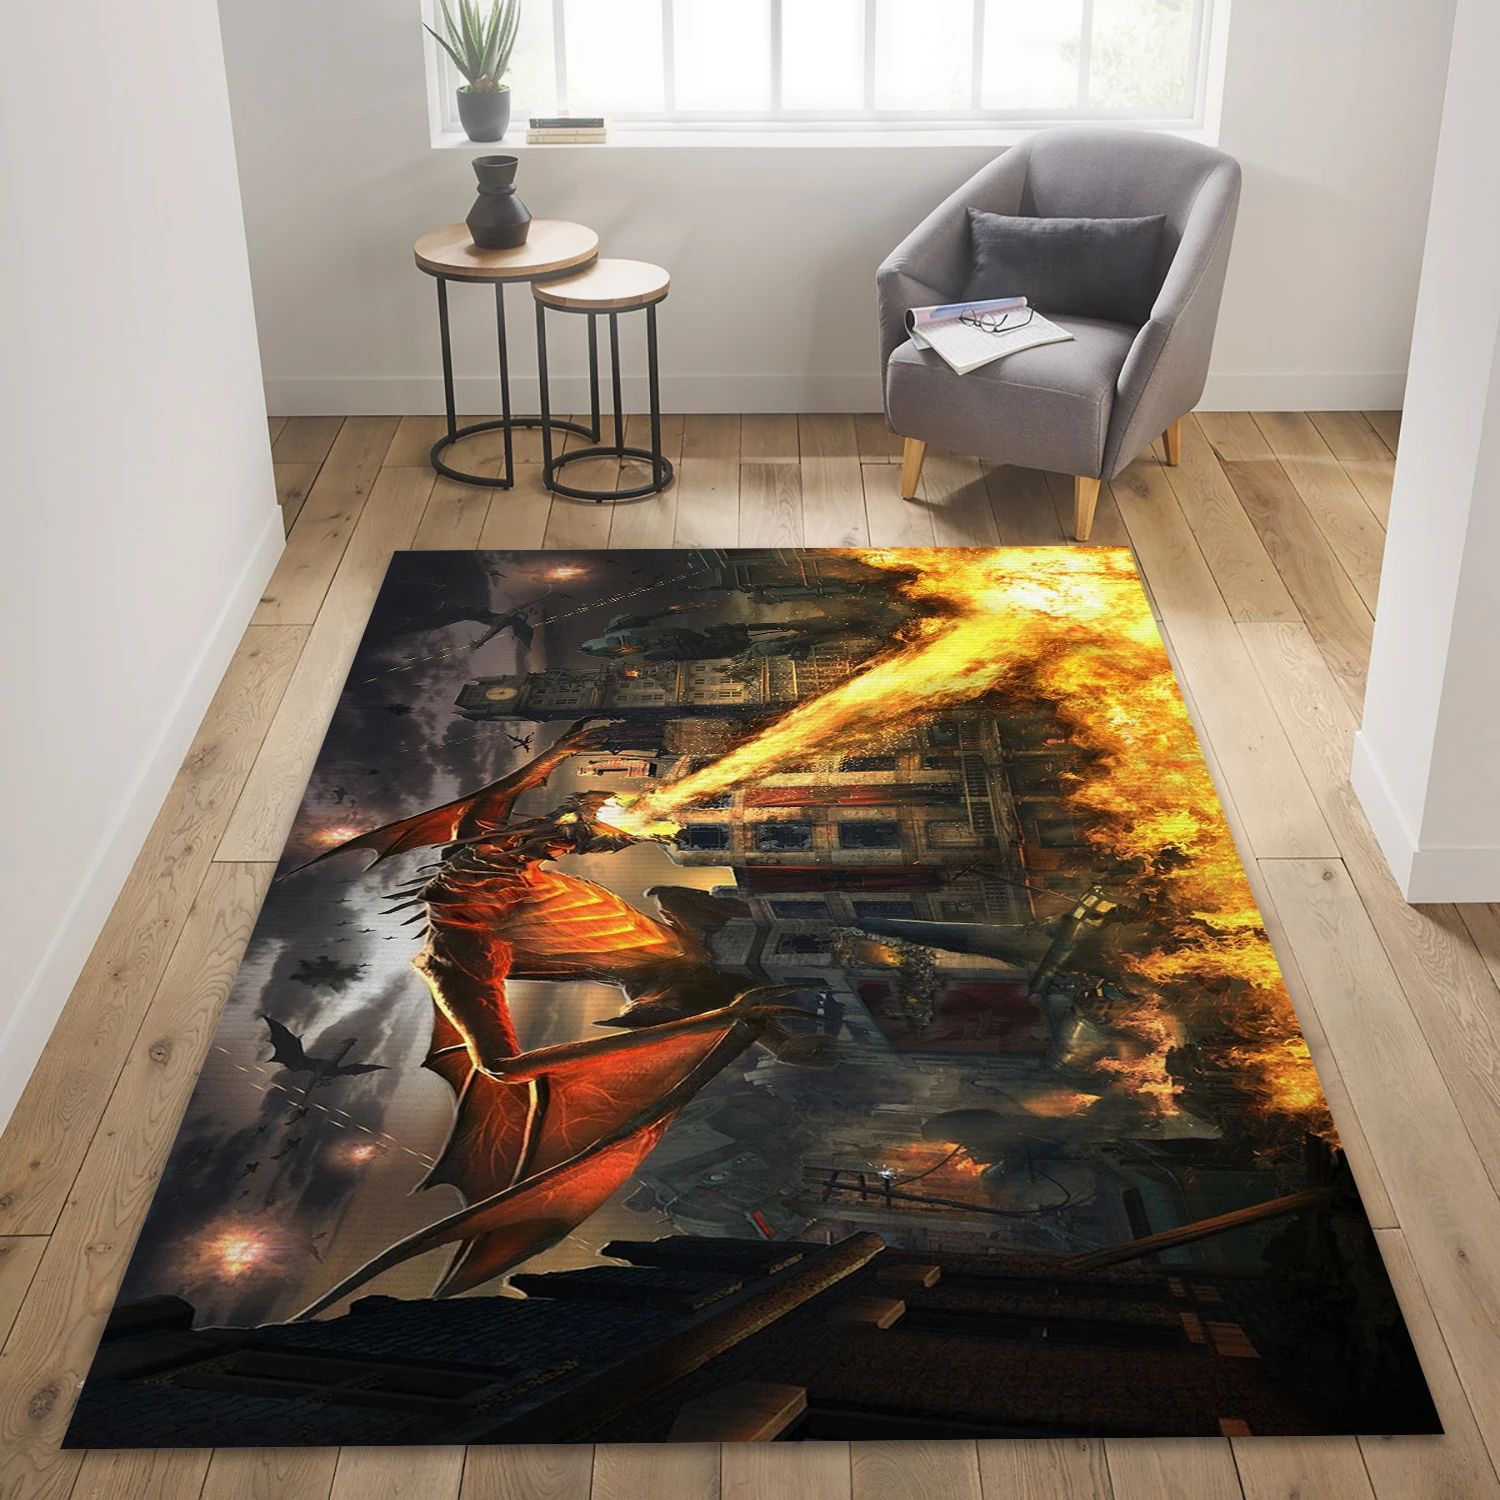 Call Of Duty Black Ops Iii Video Game Area Rug For Christmas, Living Room Rug - Home Decor Floor Decor - Indoor Outdoor Rugs 1